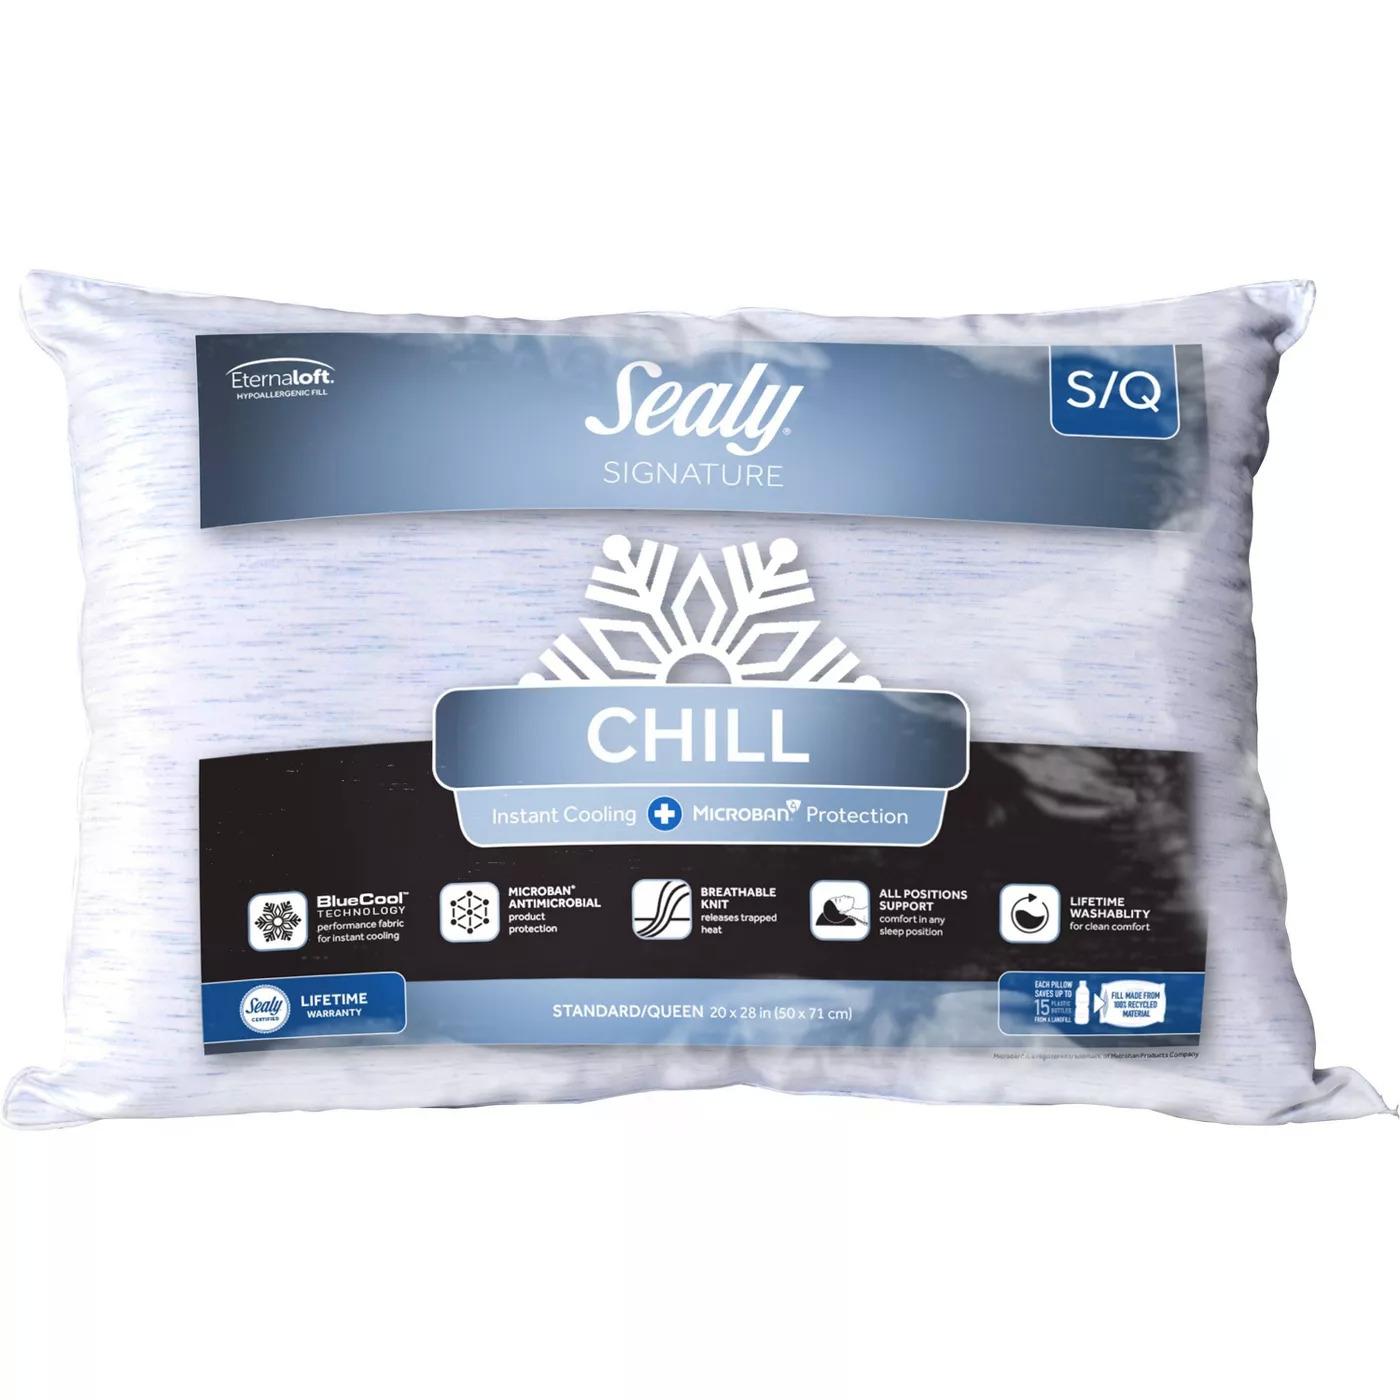 Sealy Signature Chill Instant Cooling Pillow for $8